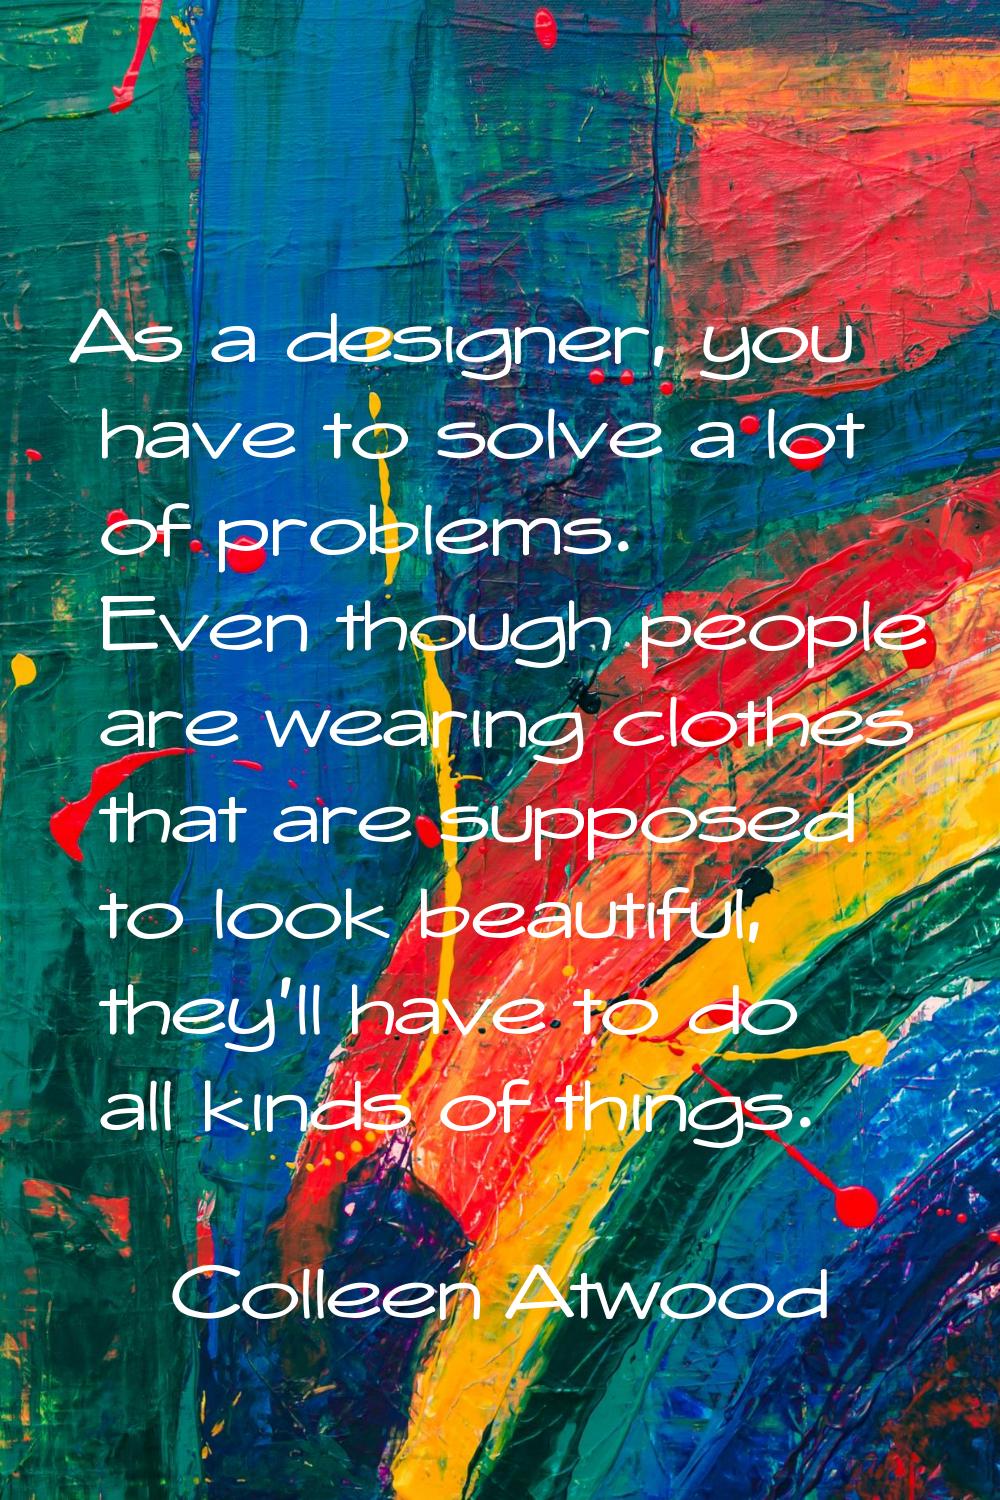 As a designer, you have to solve a lot of problems. Even though people are wearing clothes that are